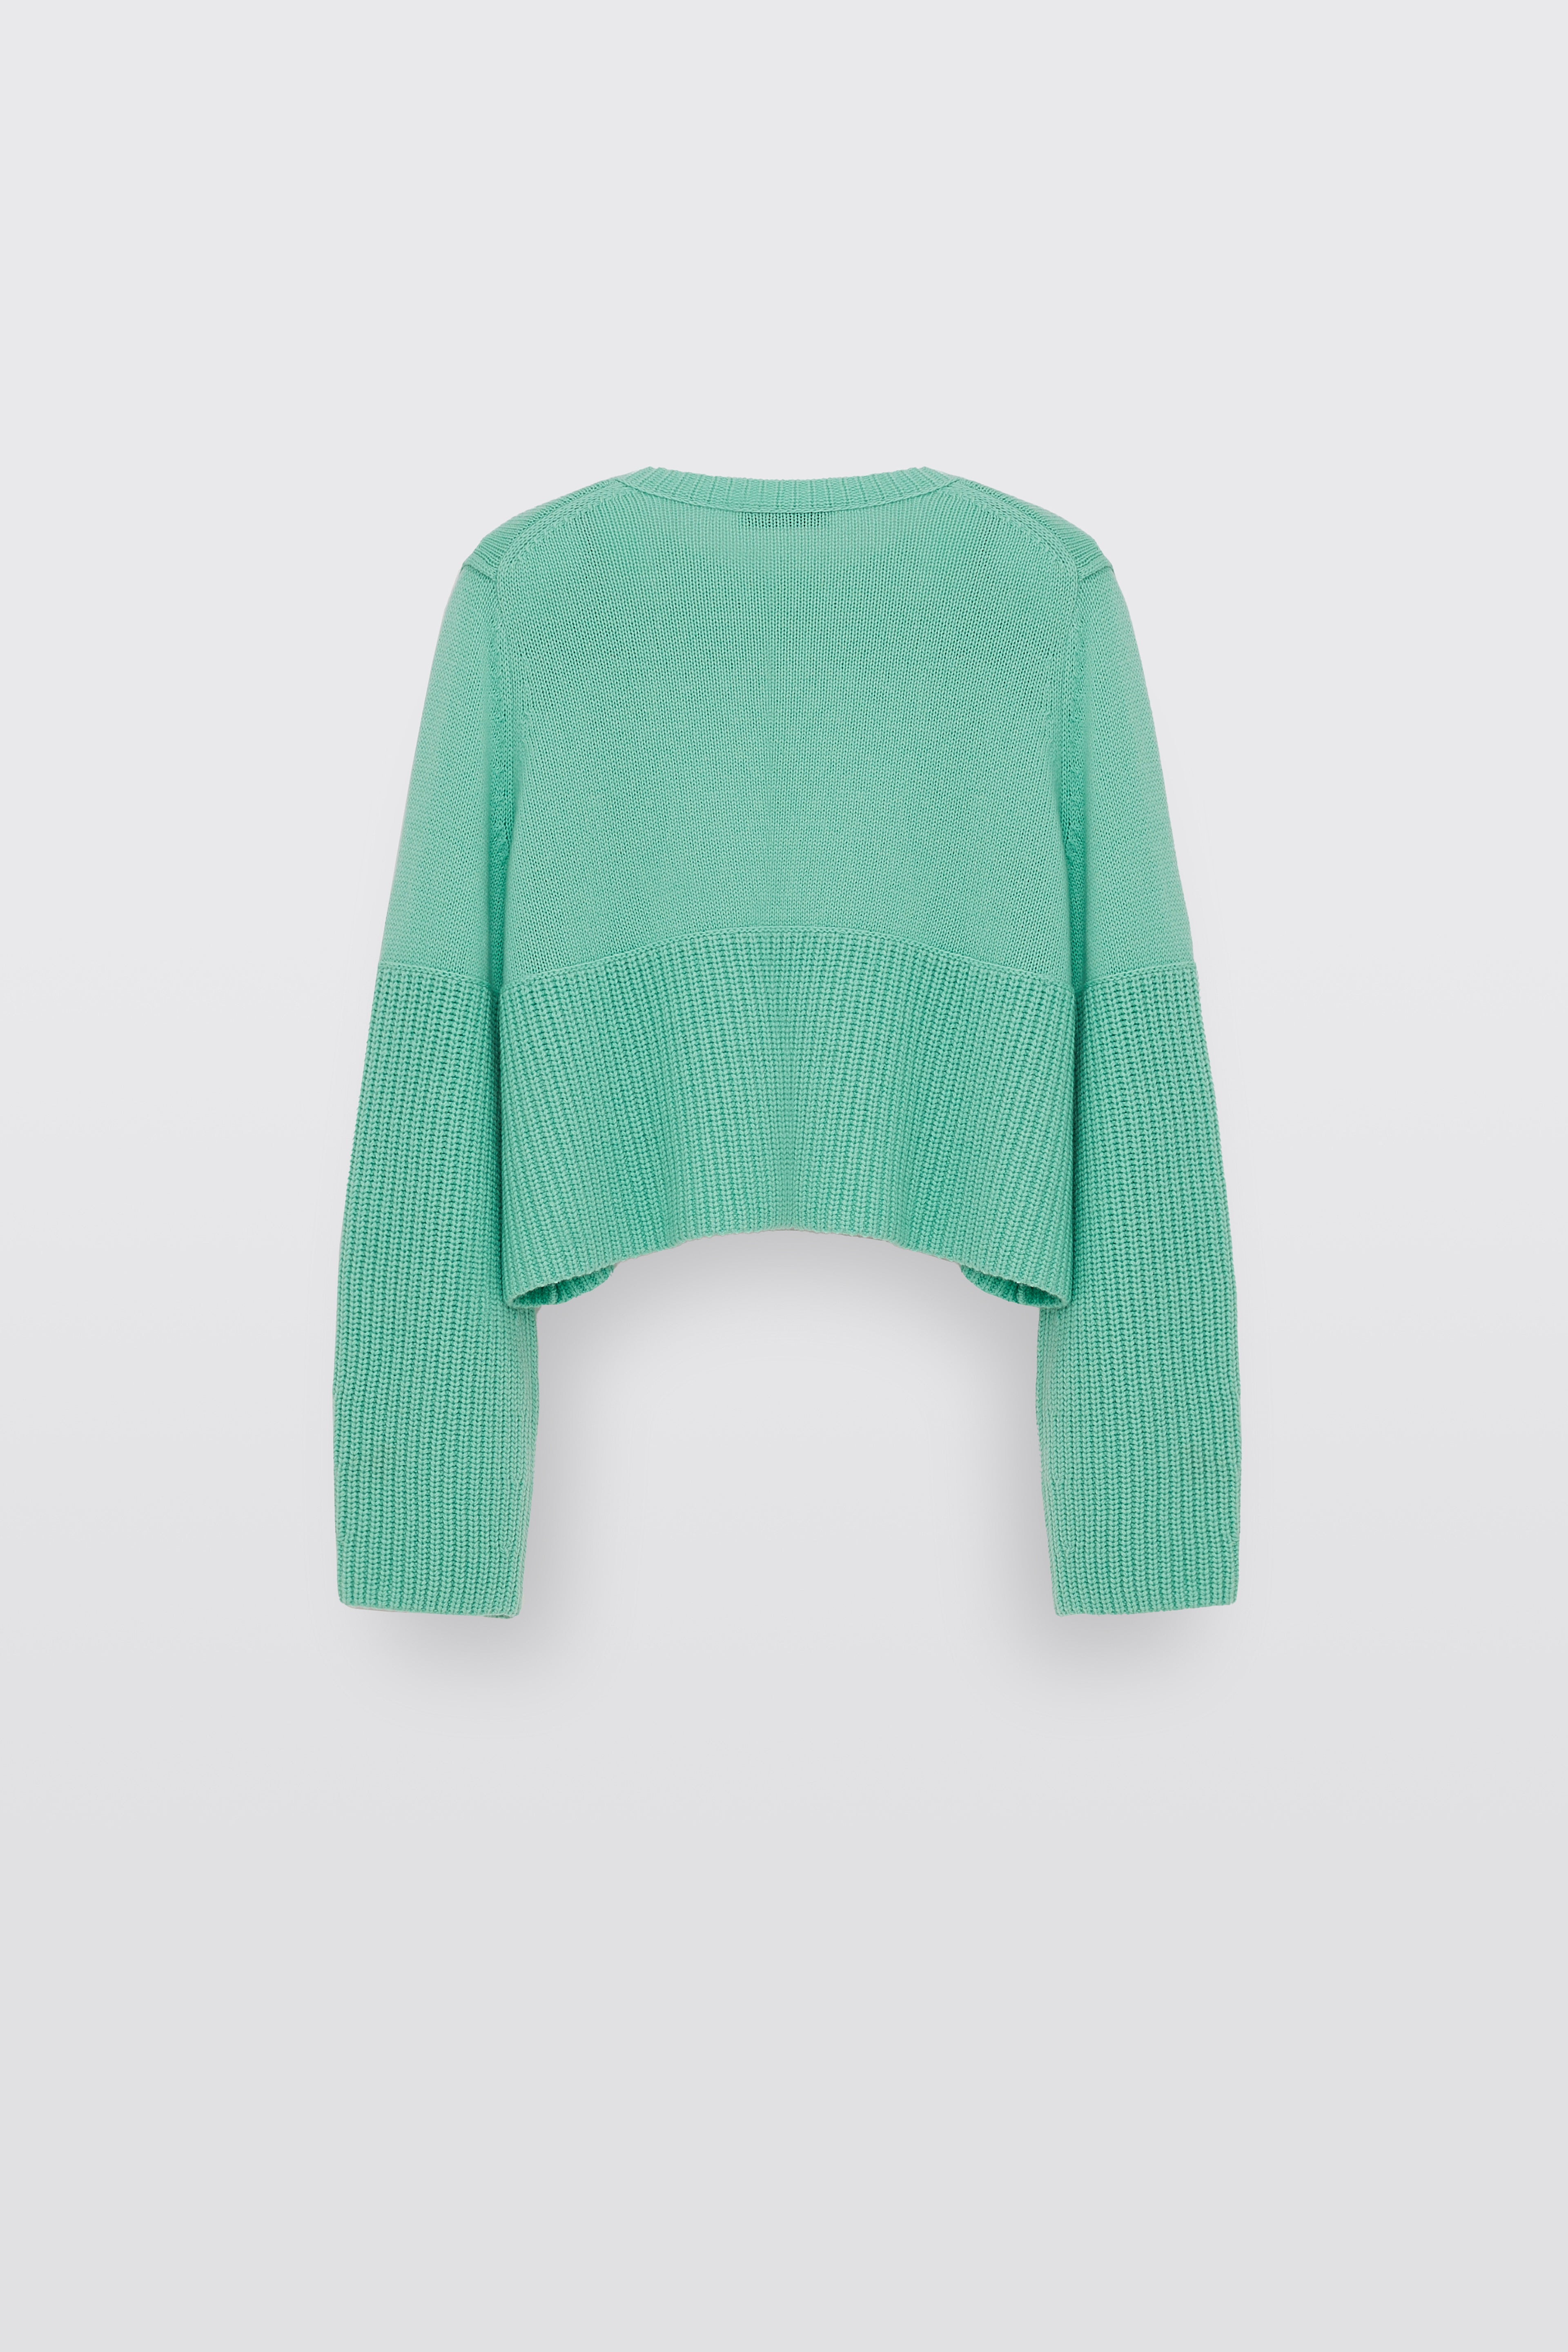 Dorothee-Schumacher-OUTLET-SALE-MODERN-STATEMENTS-pullover-Strick-2_5a22fb14-231a-45bf-8698-42a6a772077e.jpg